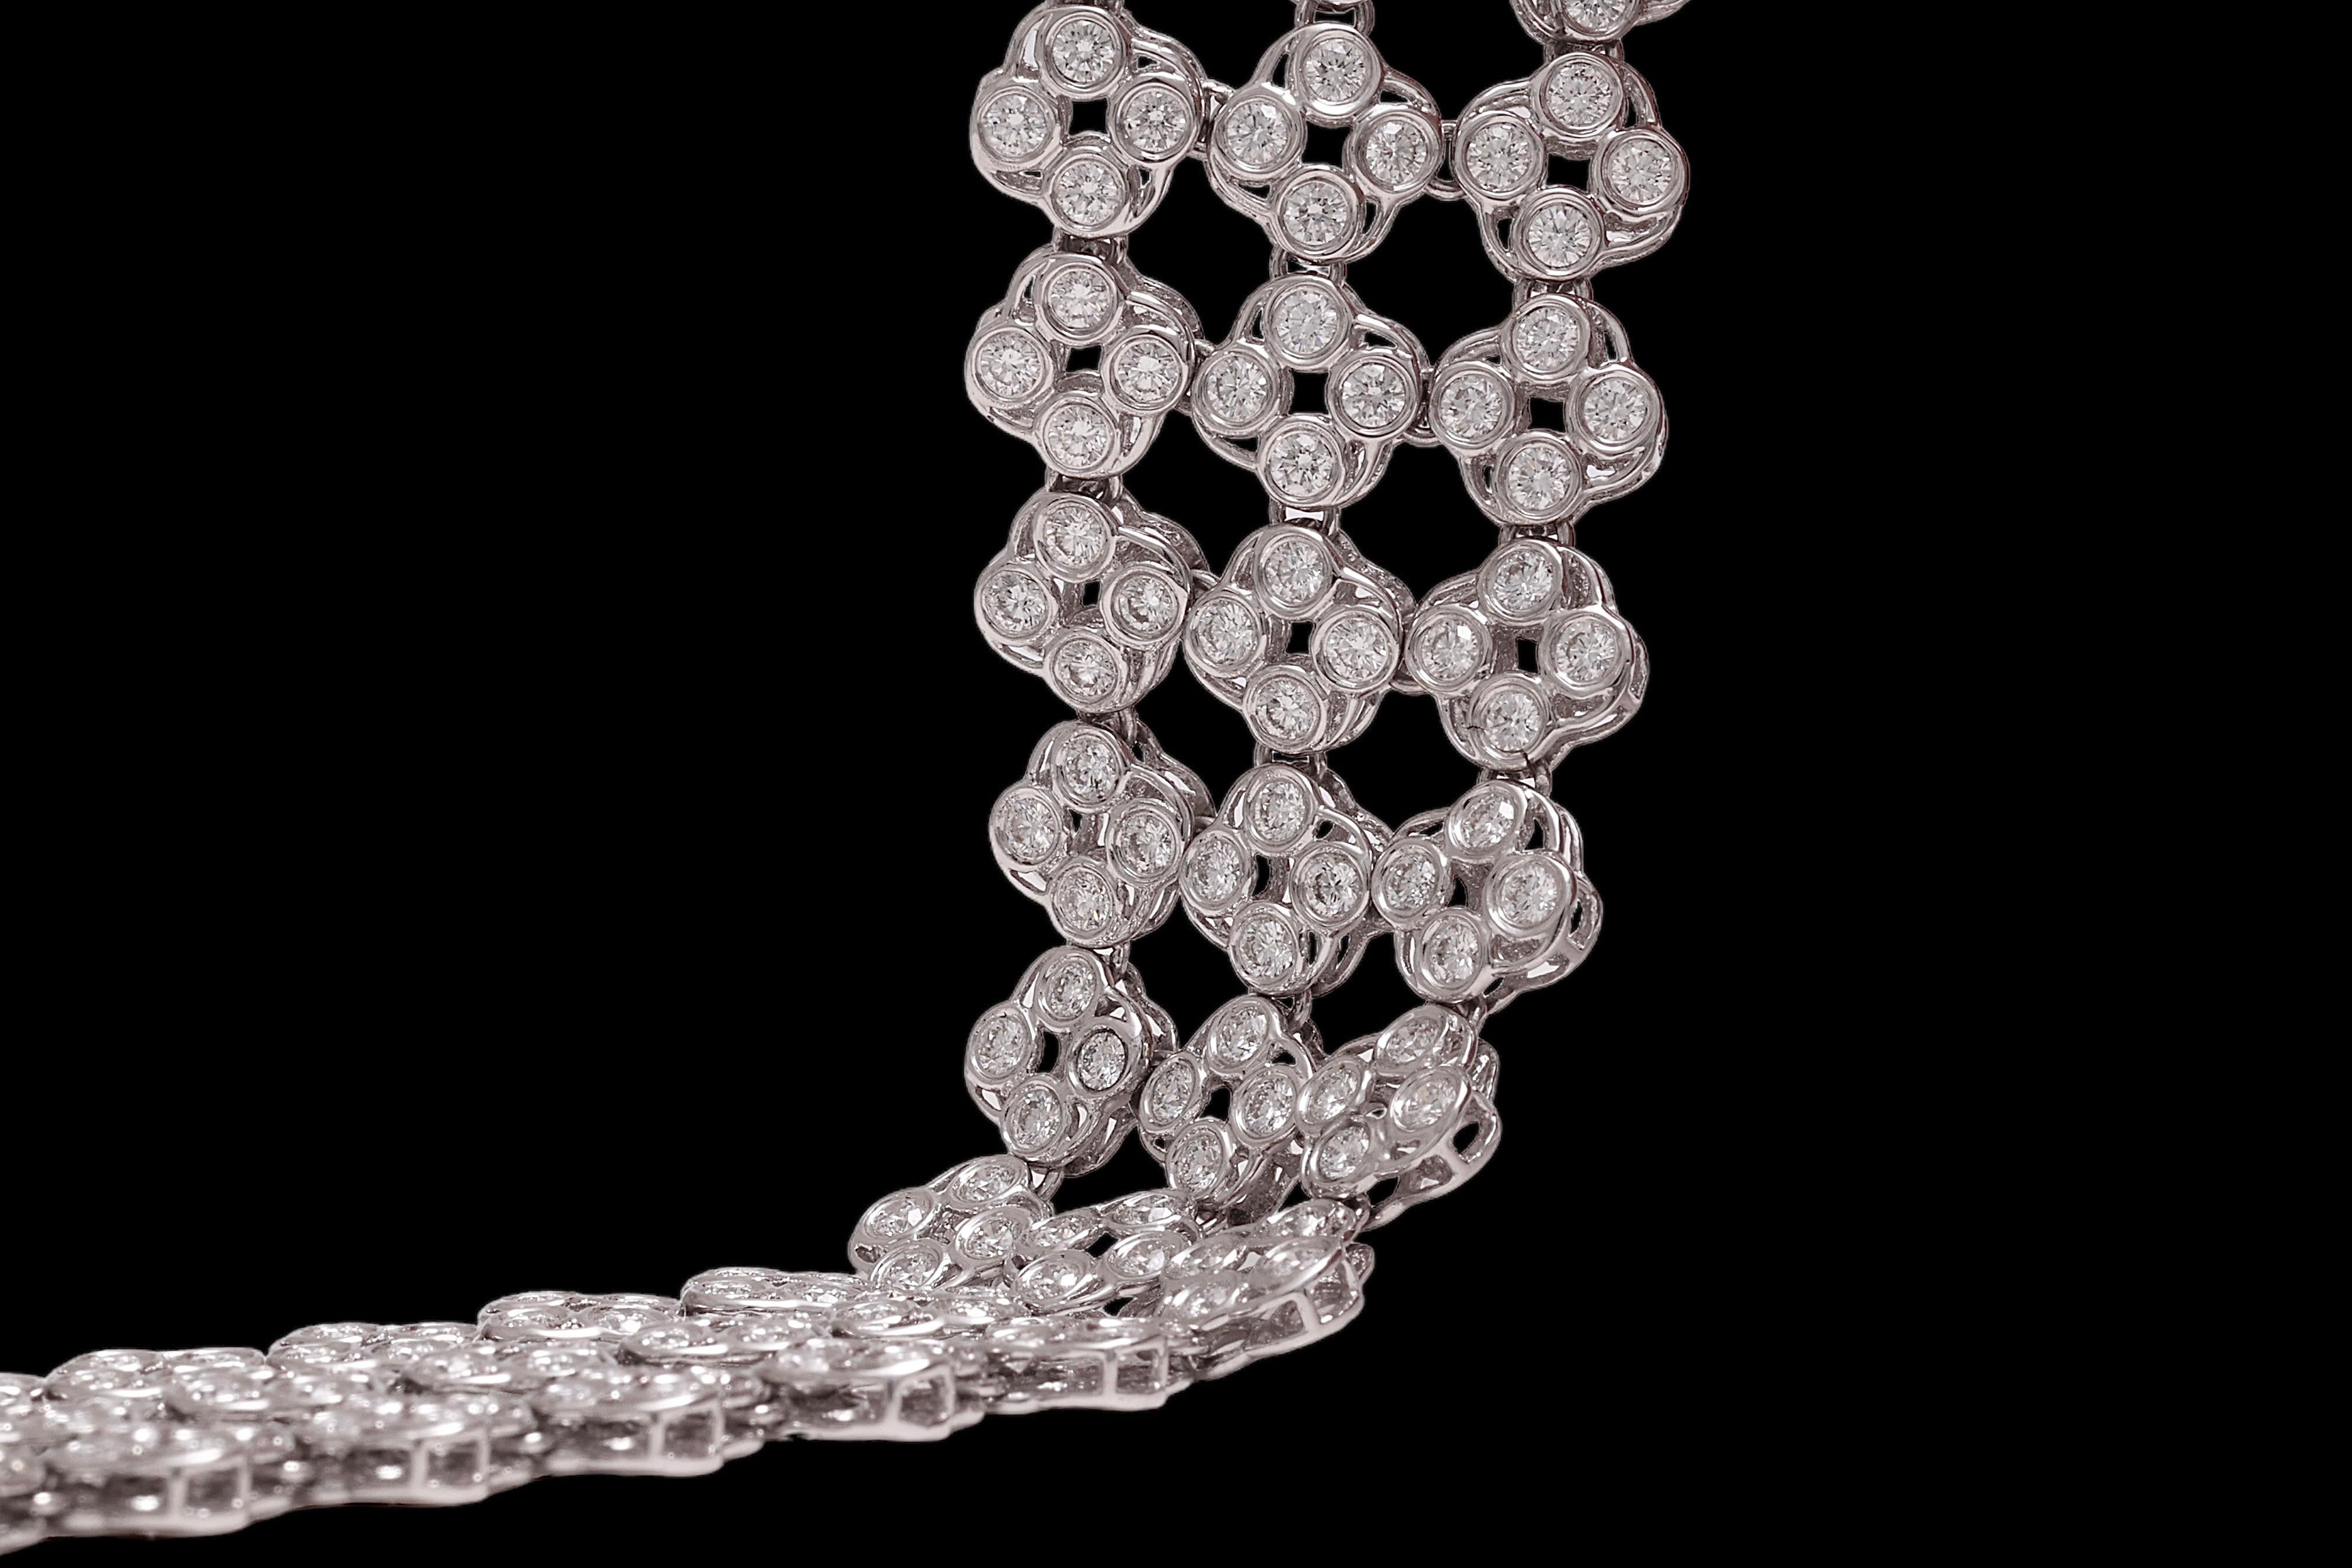 18 kt. White Gold 3 Row Tennis Bracelet With 10.57 ct. Round Cut Diamonds For Sale 3